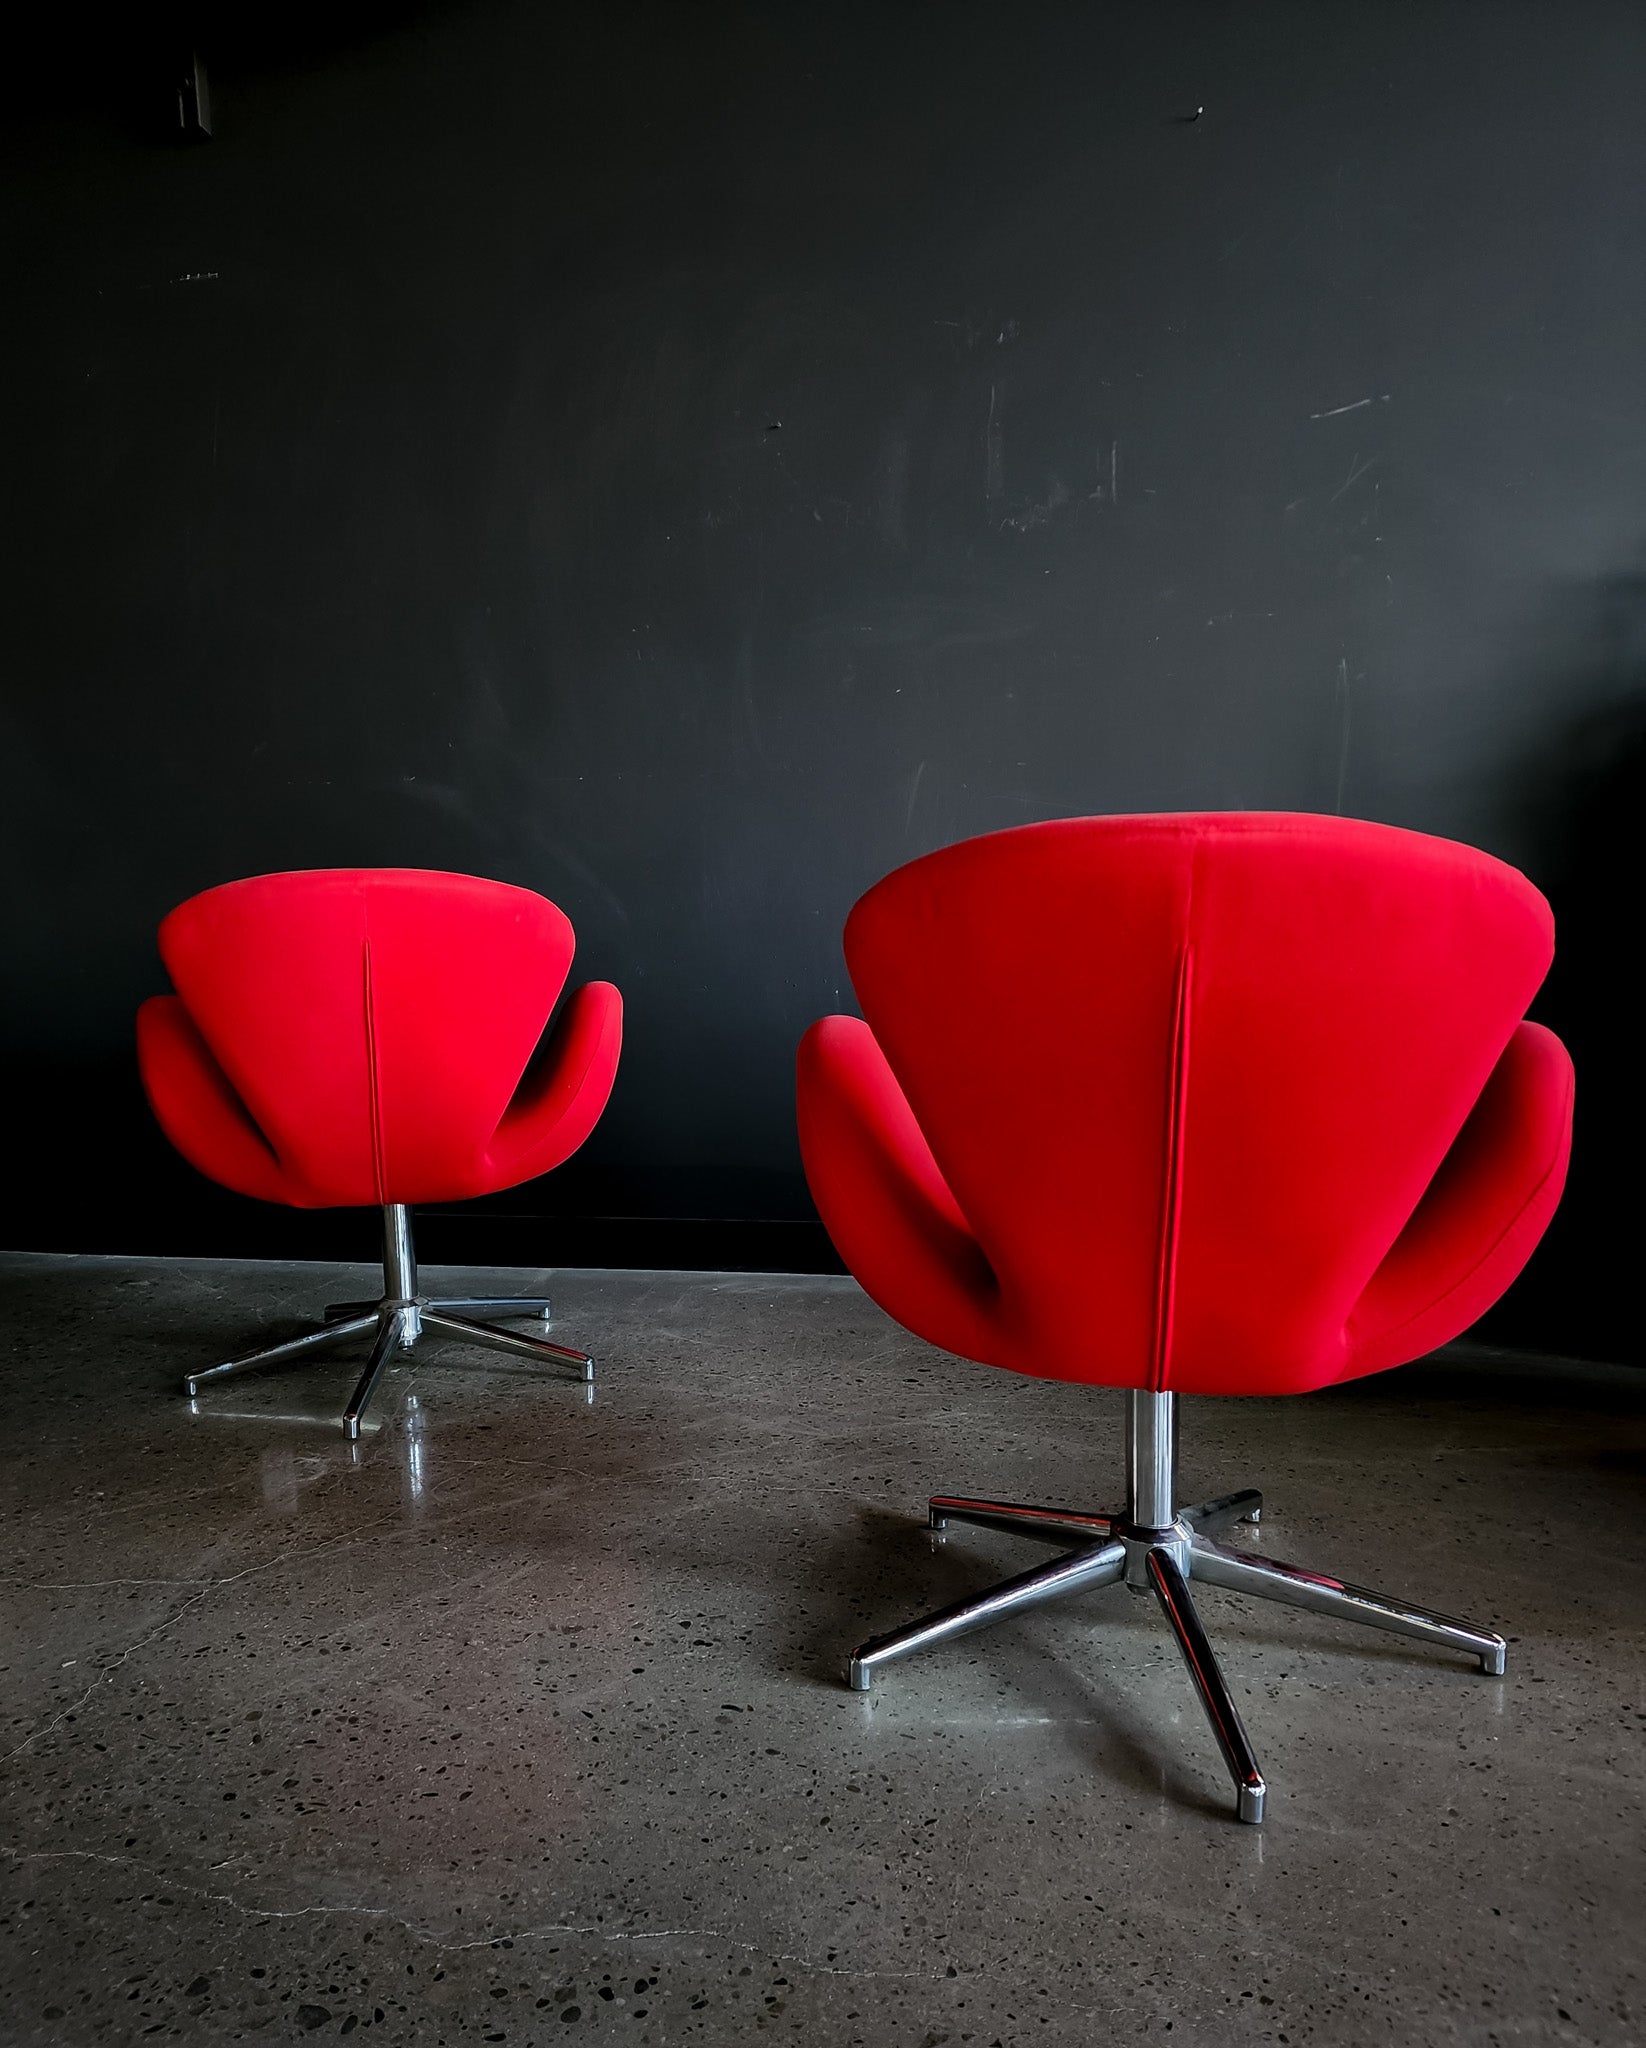 Reproductions of Arne Jacobsen's Swan Chairs - Reclaimed Mt. Goods